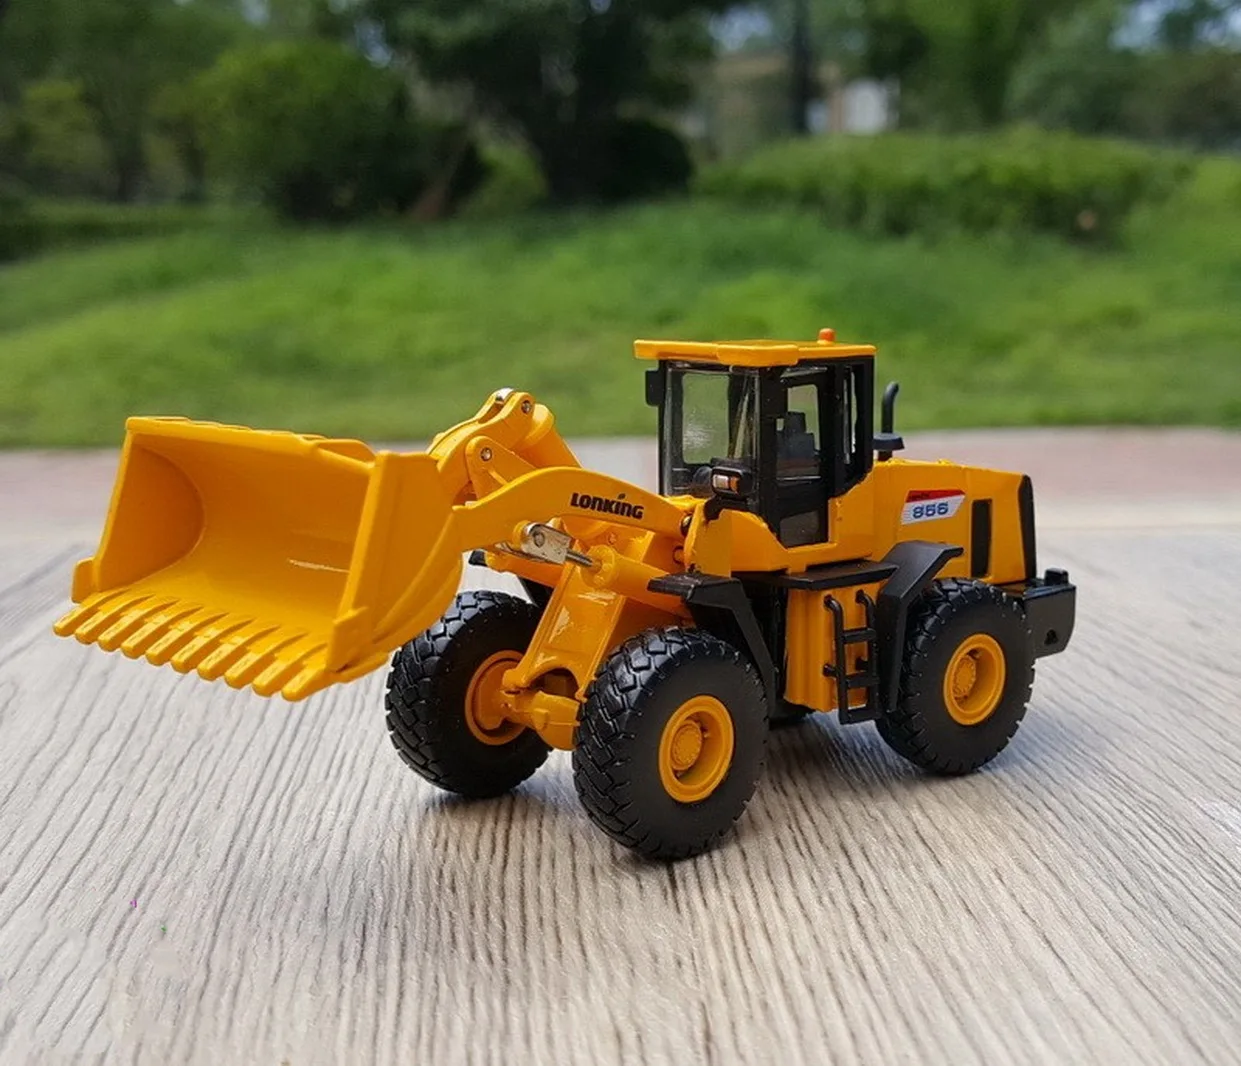 1/35 Scale LONKING LG856B Wheel Loader DieCast Model Collection Toy Gift